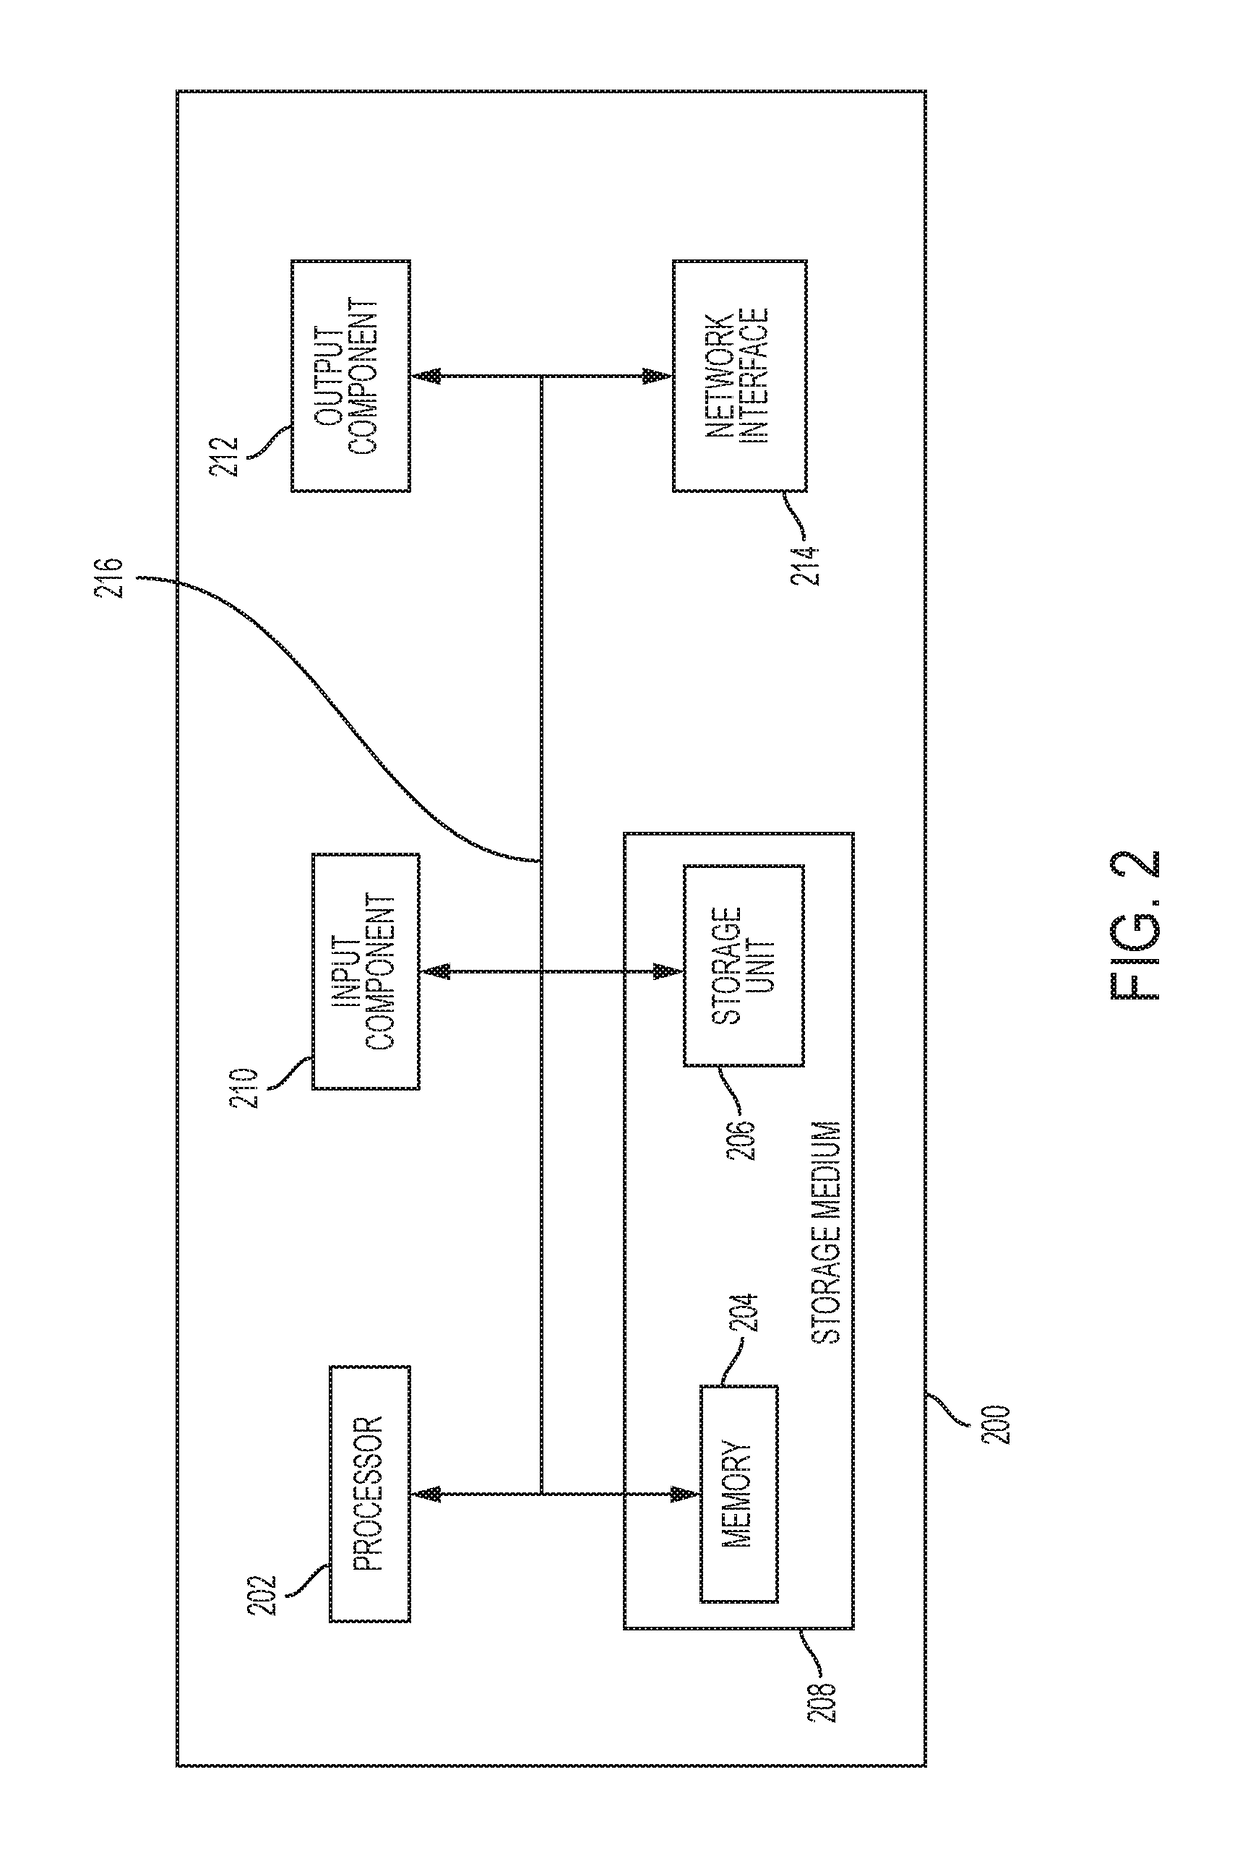 Restaurant reservation and table management system and method